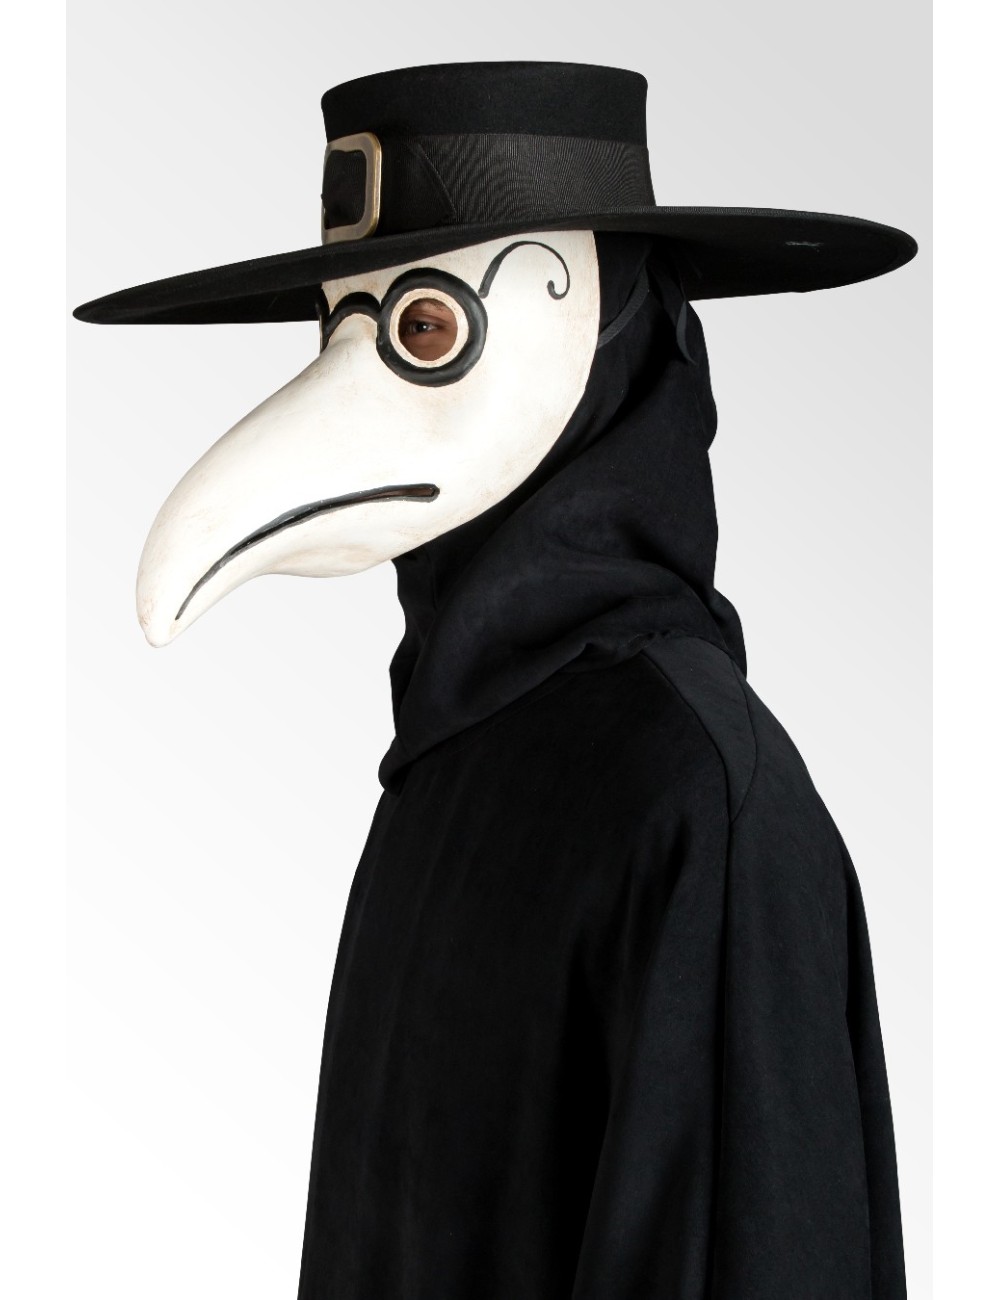 THE PLAGUE DOCTOR IS HERE & HE BROKE IN!!